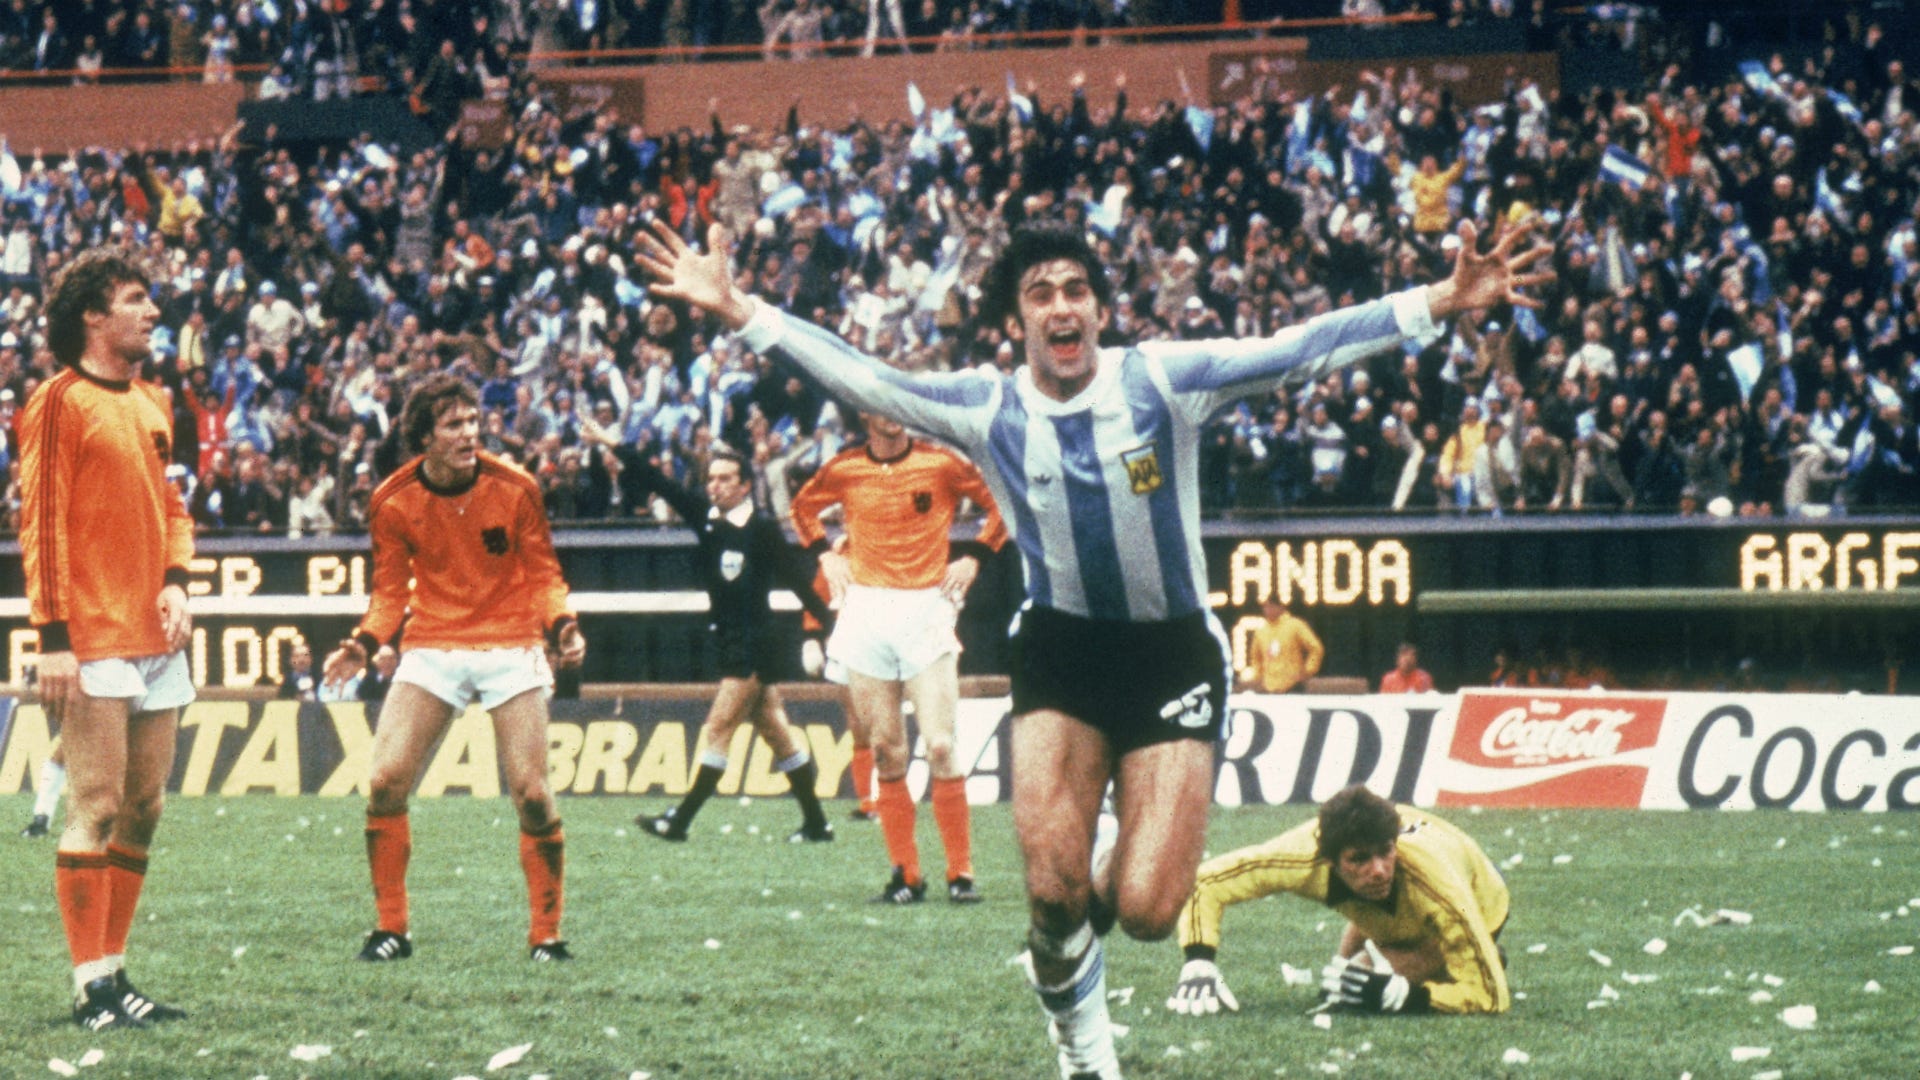 History of the World Cup: 1978 – Argentina finally wins